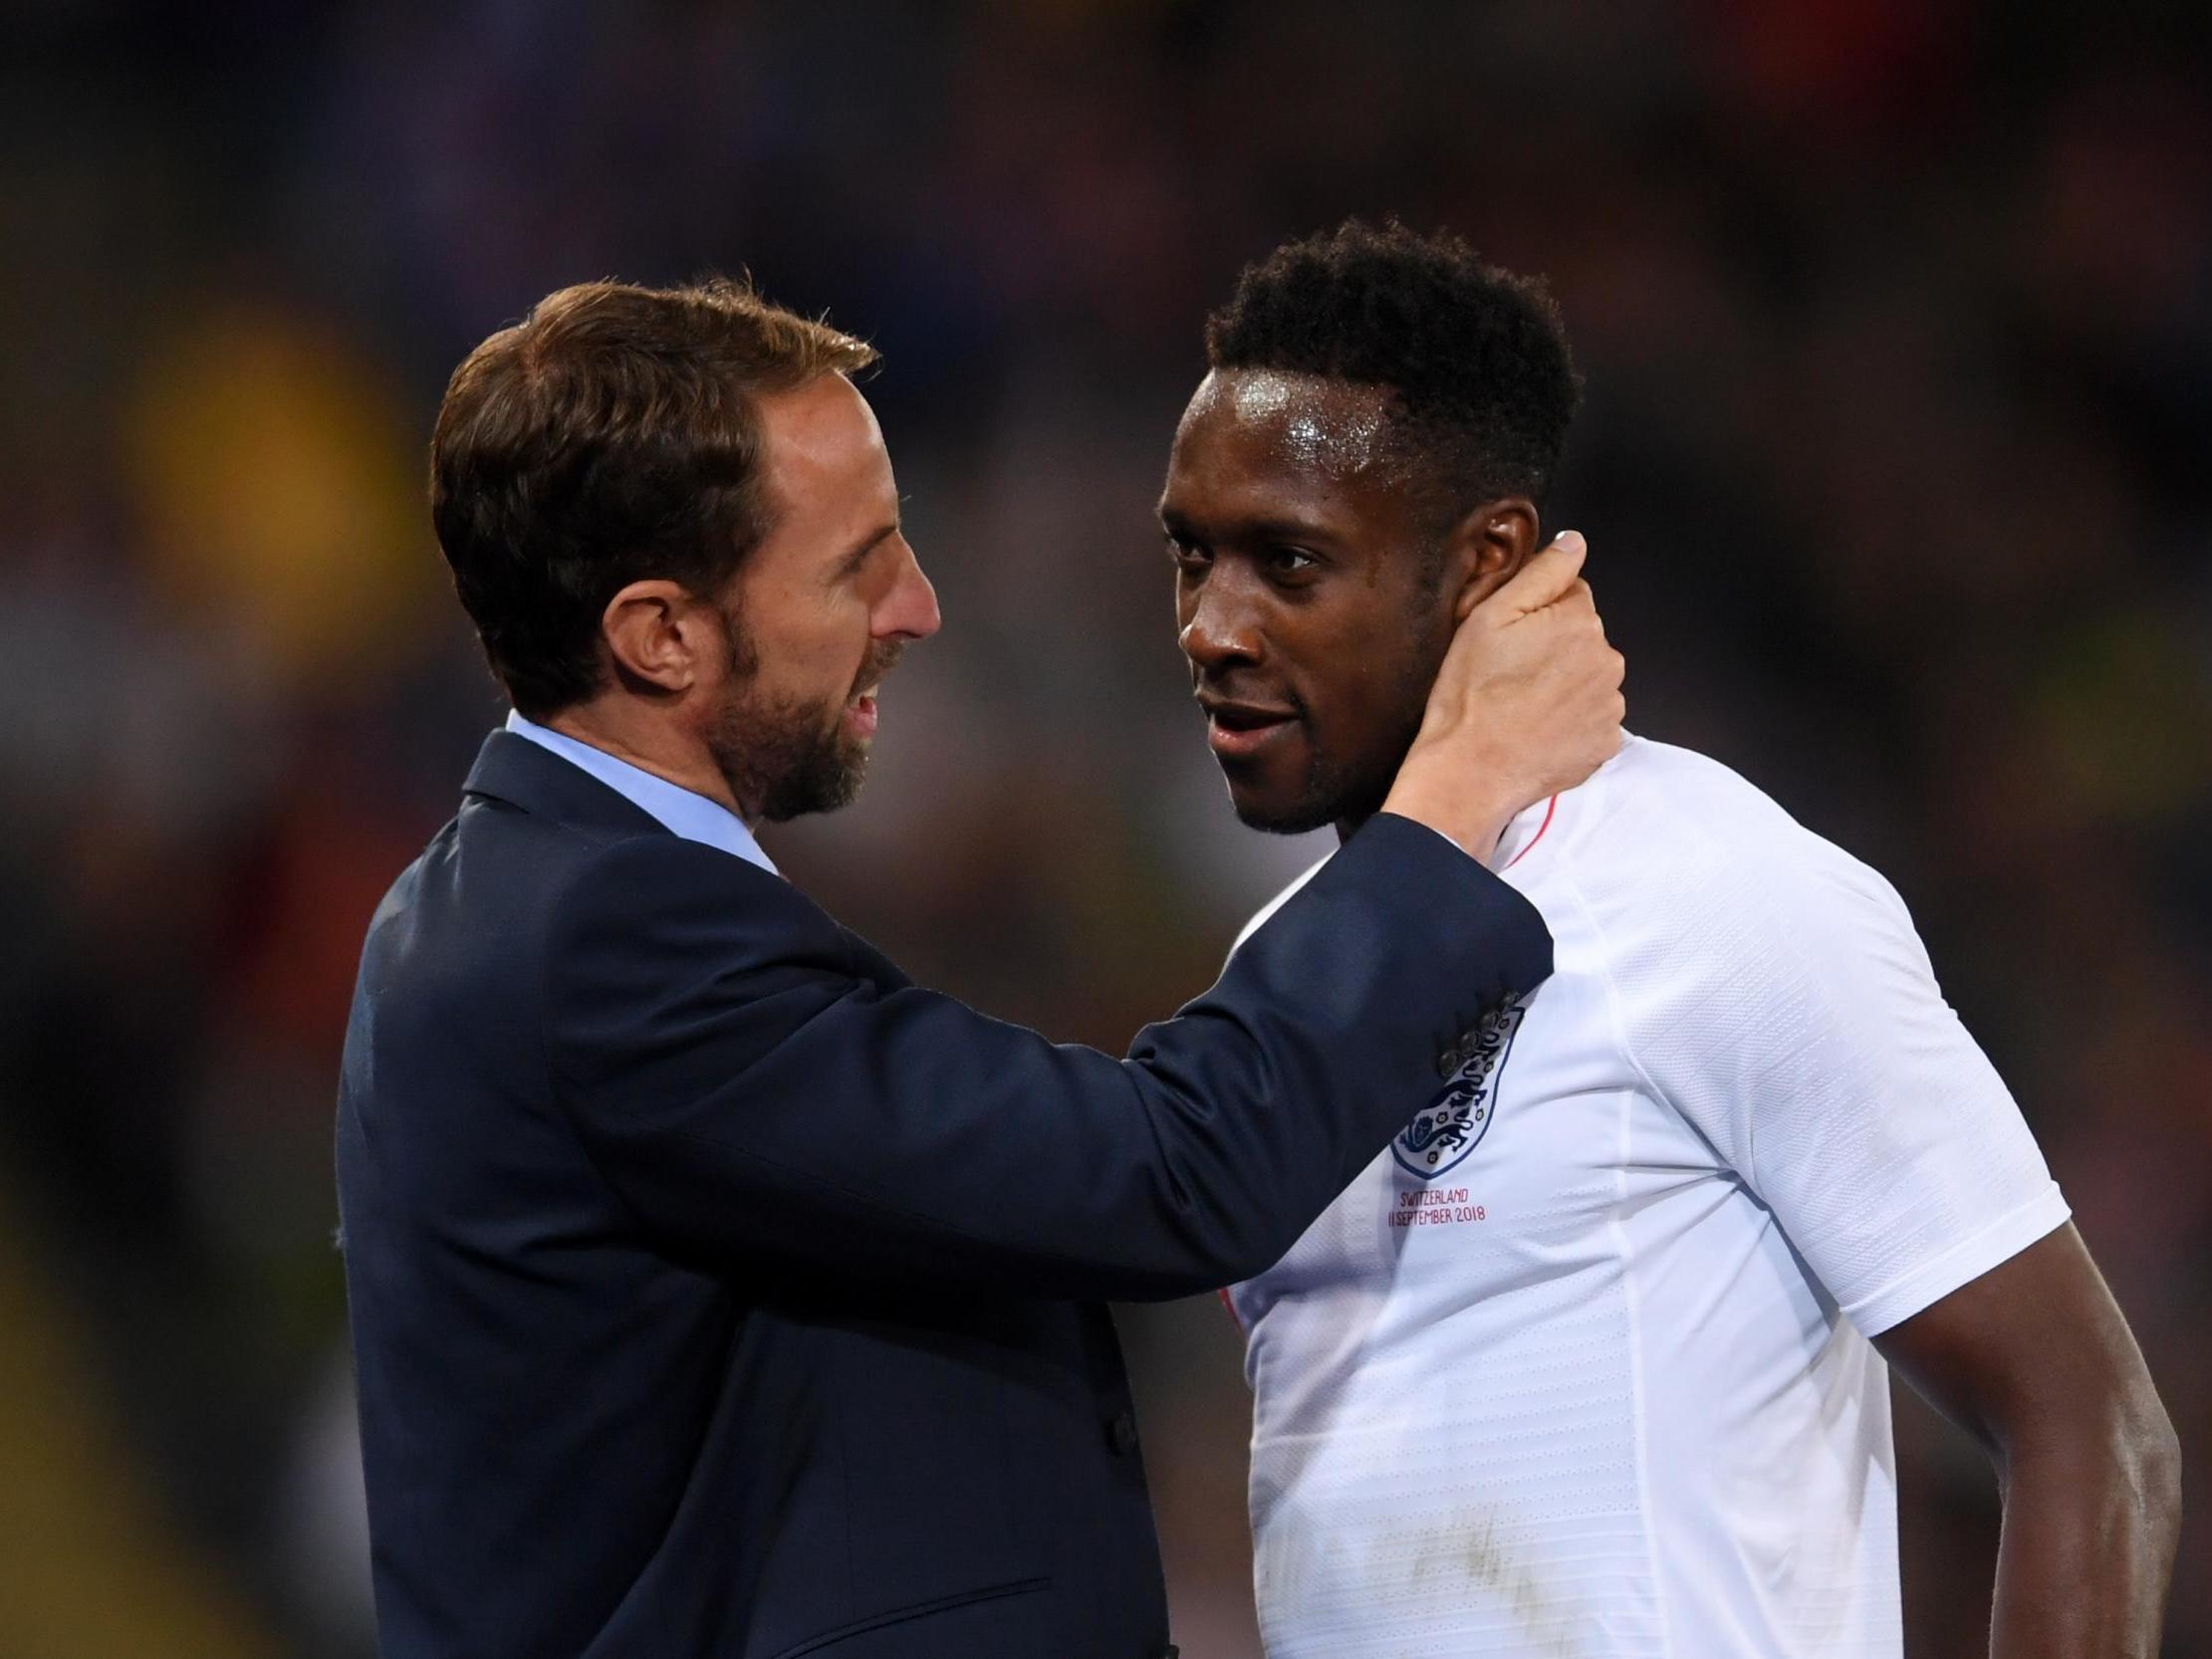 Gareth Southgate relieved to end England&apos;s three-match losing streak ahead of Croatia and Spain tests